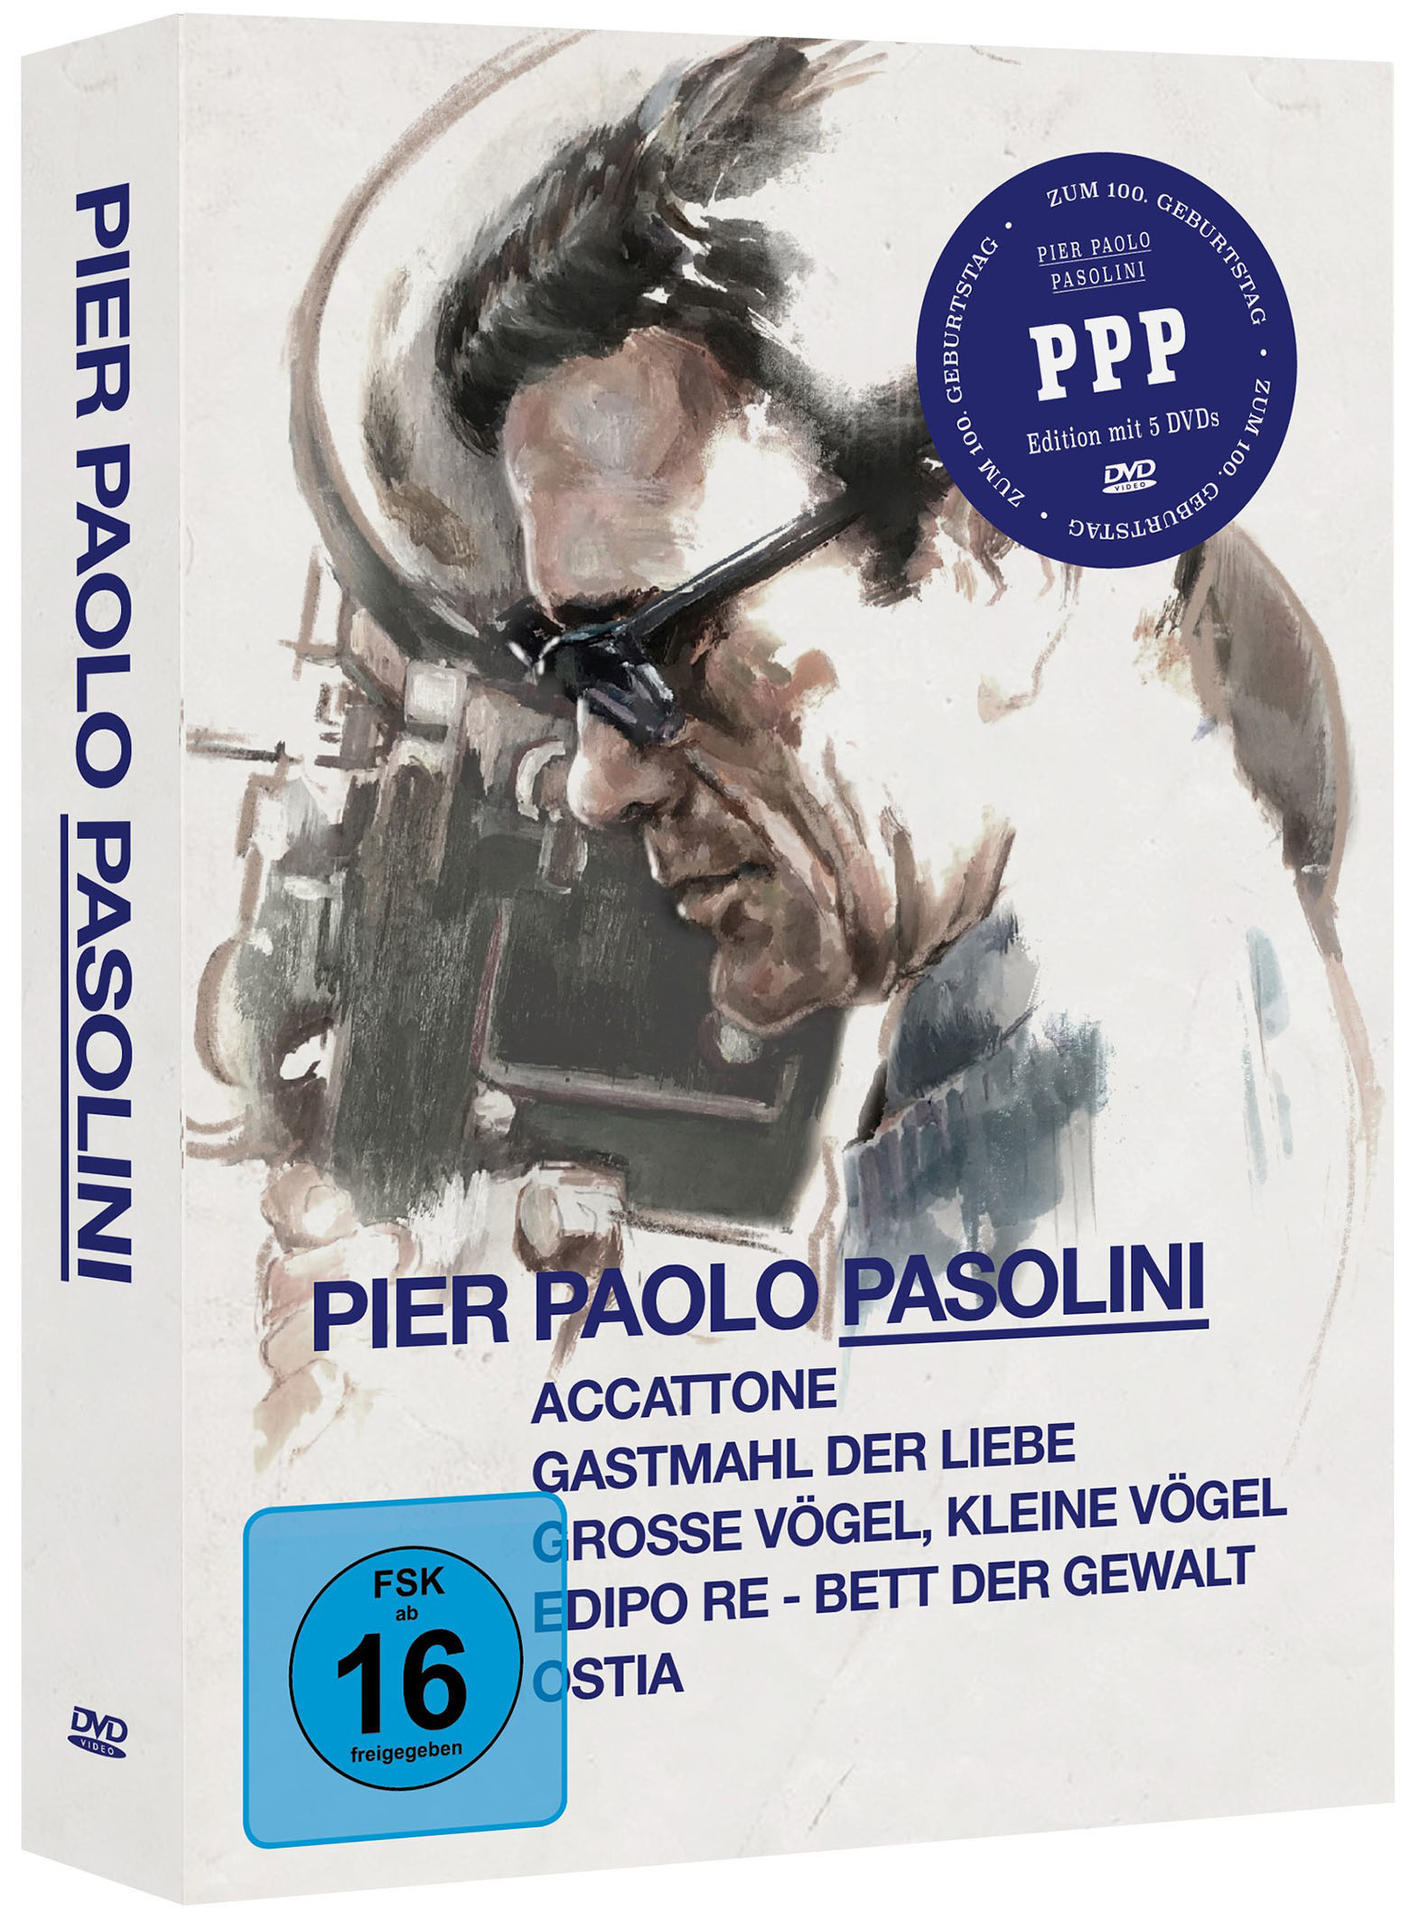 Paolo DVD Collection Pasolini Pier